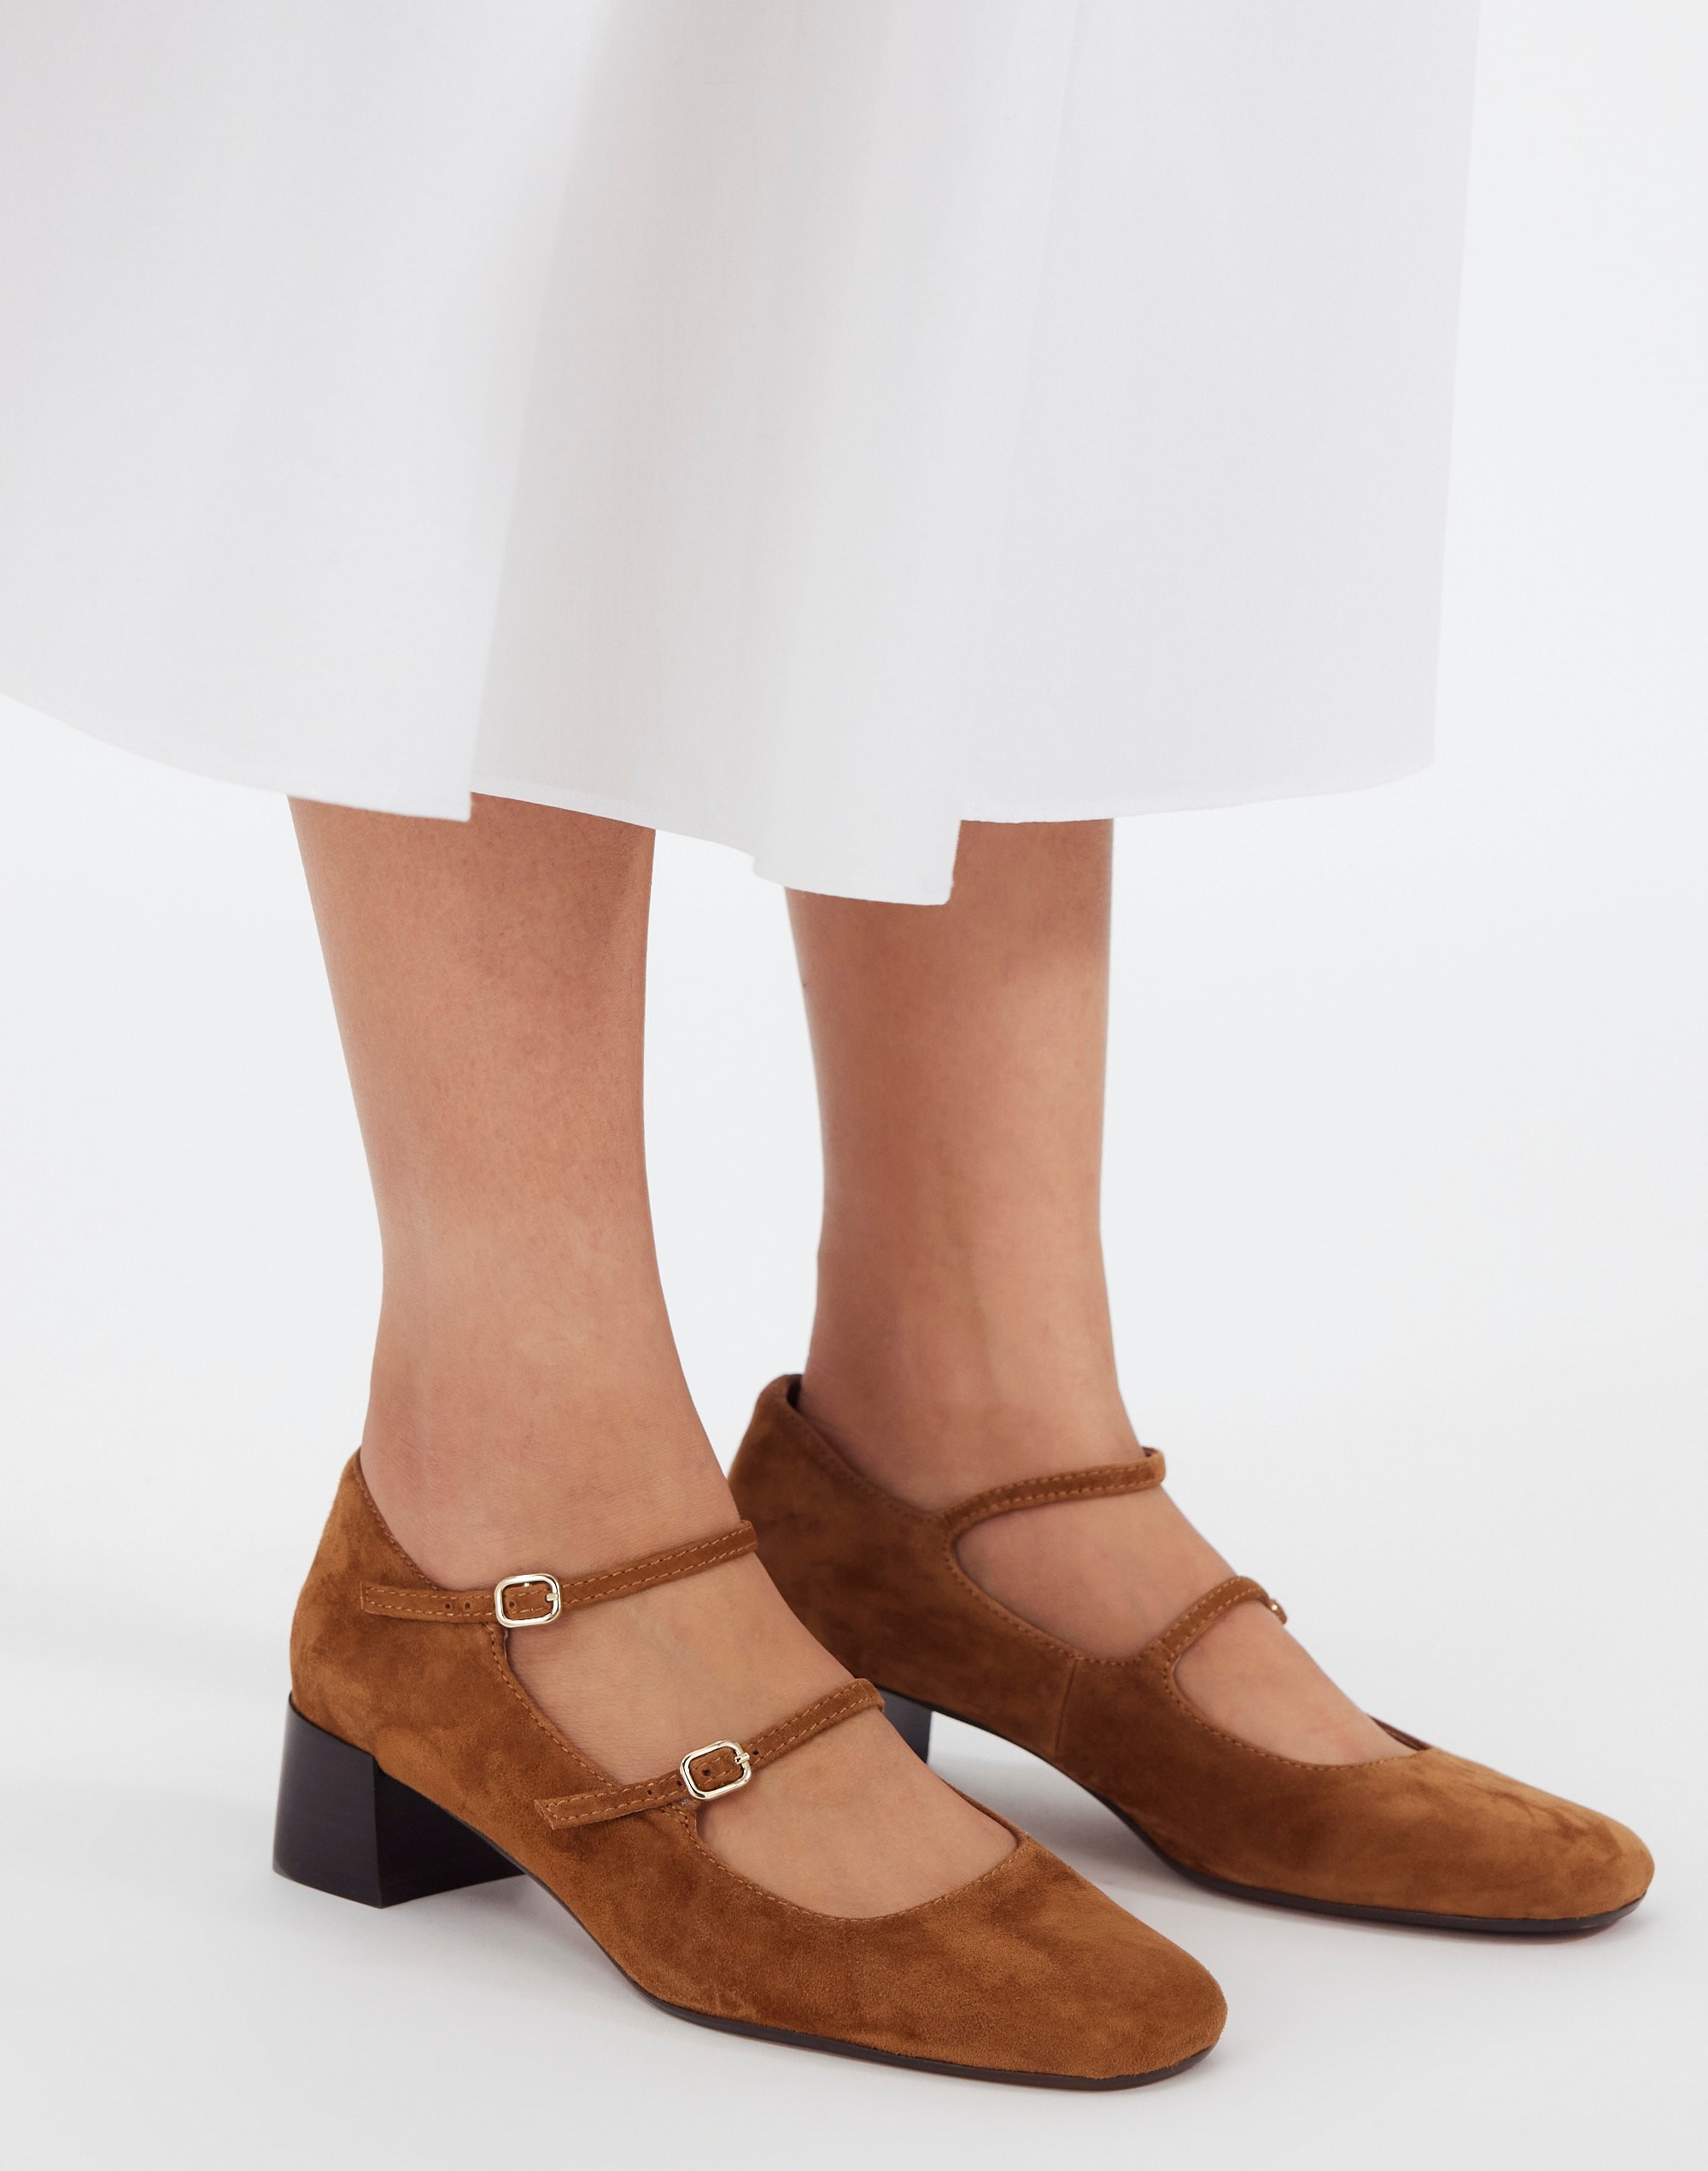 The Nettie Heeled Mary Jane Suede